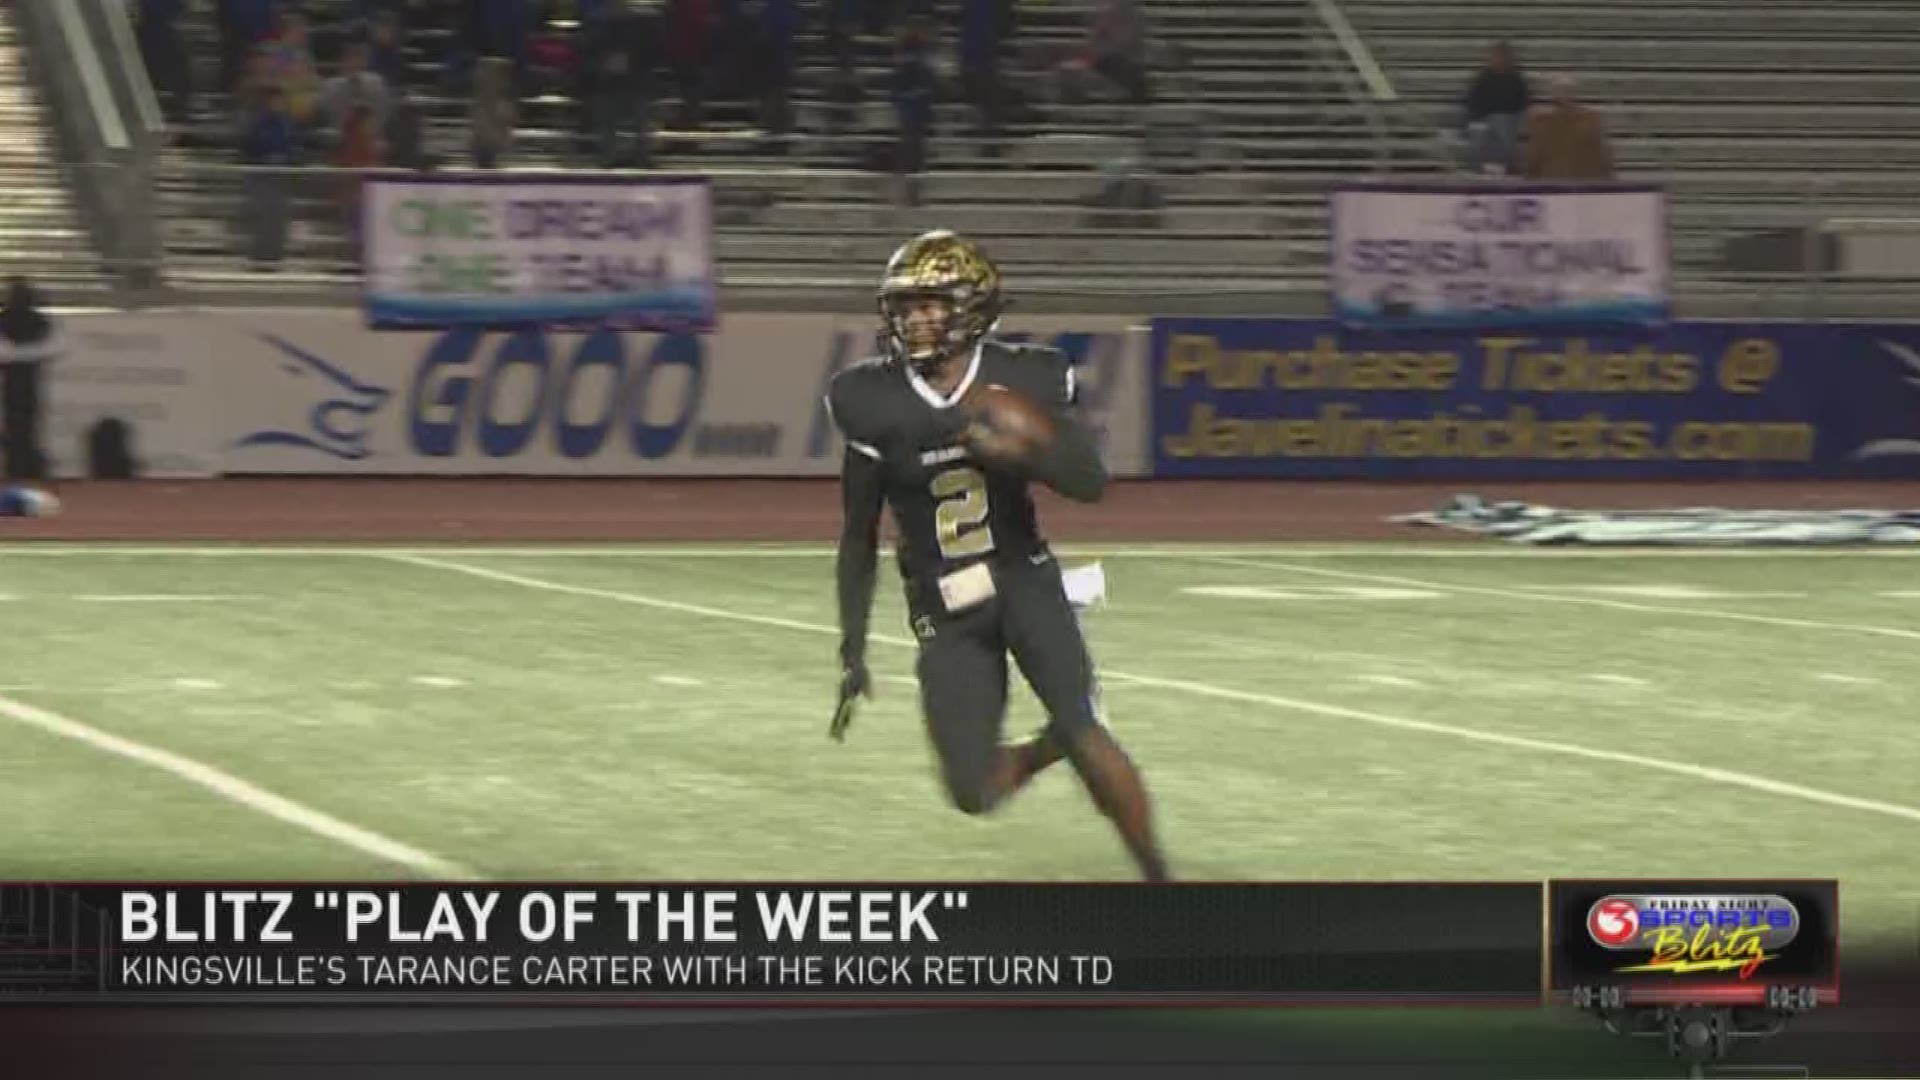 Friday Night Sports Blitz - Week 11: Part IV includes Tarance Carter's play of the week and a look at this weekend's games.